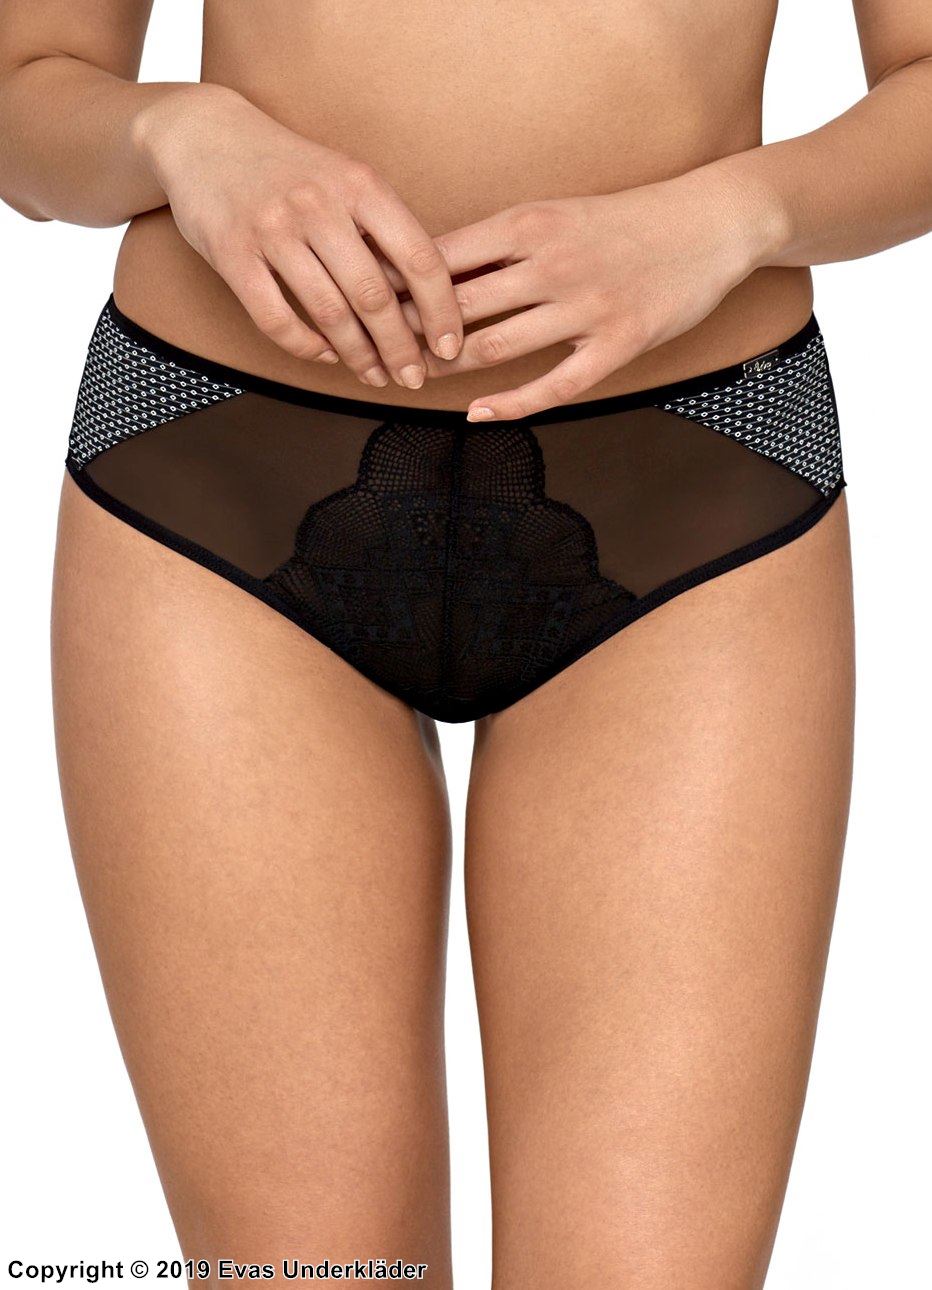 Cheeky panties, see-through mesh, lace overlay